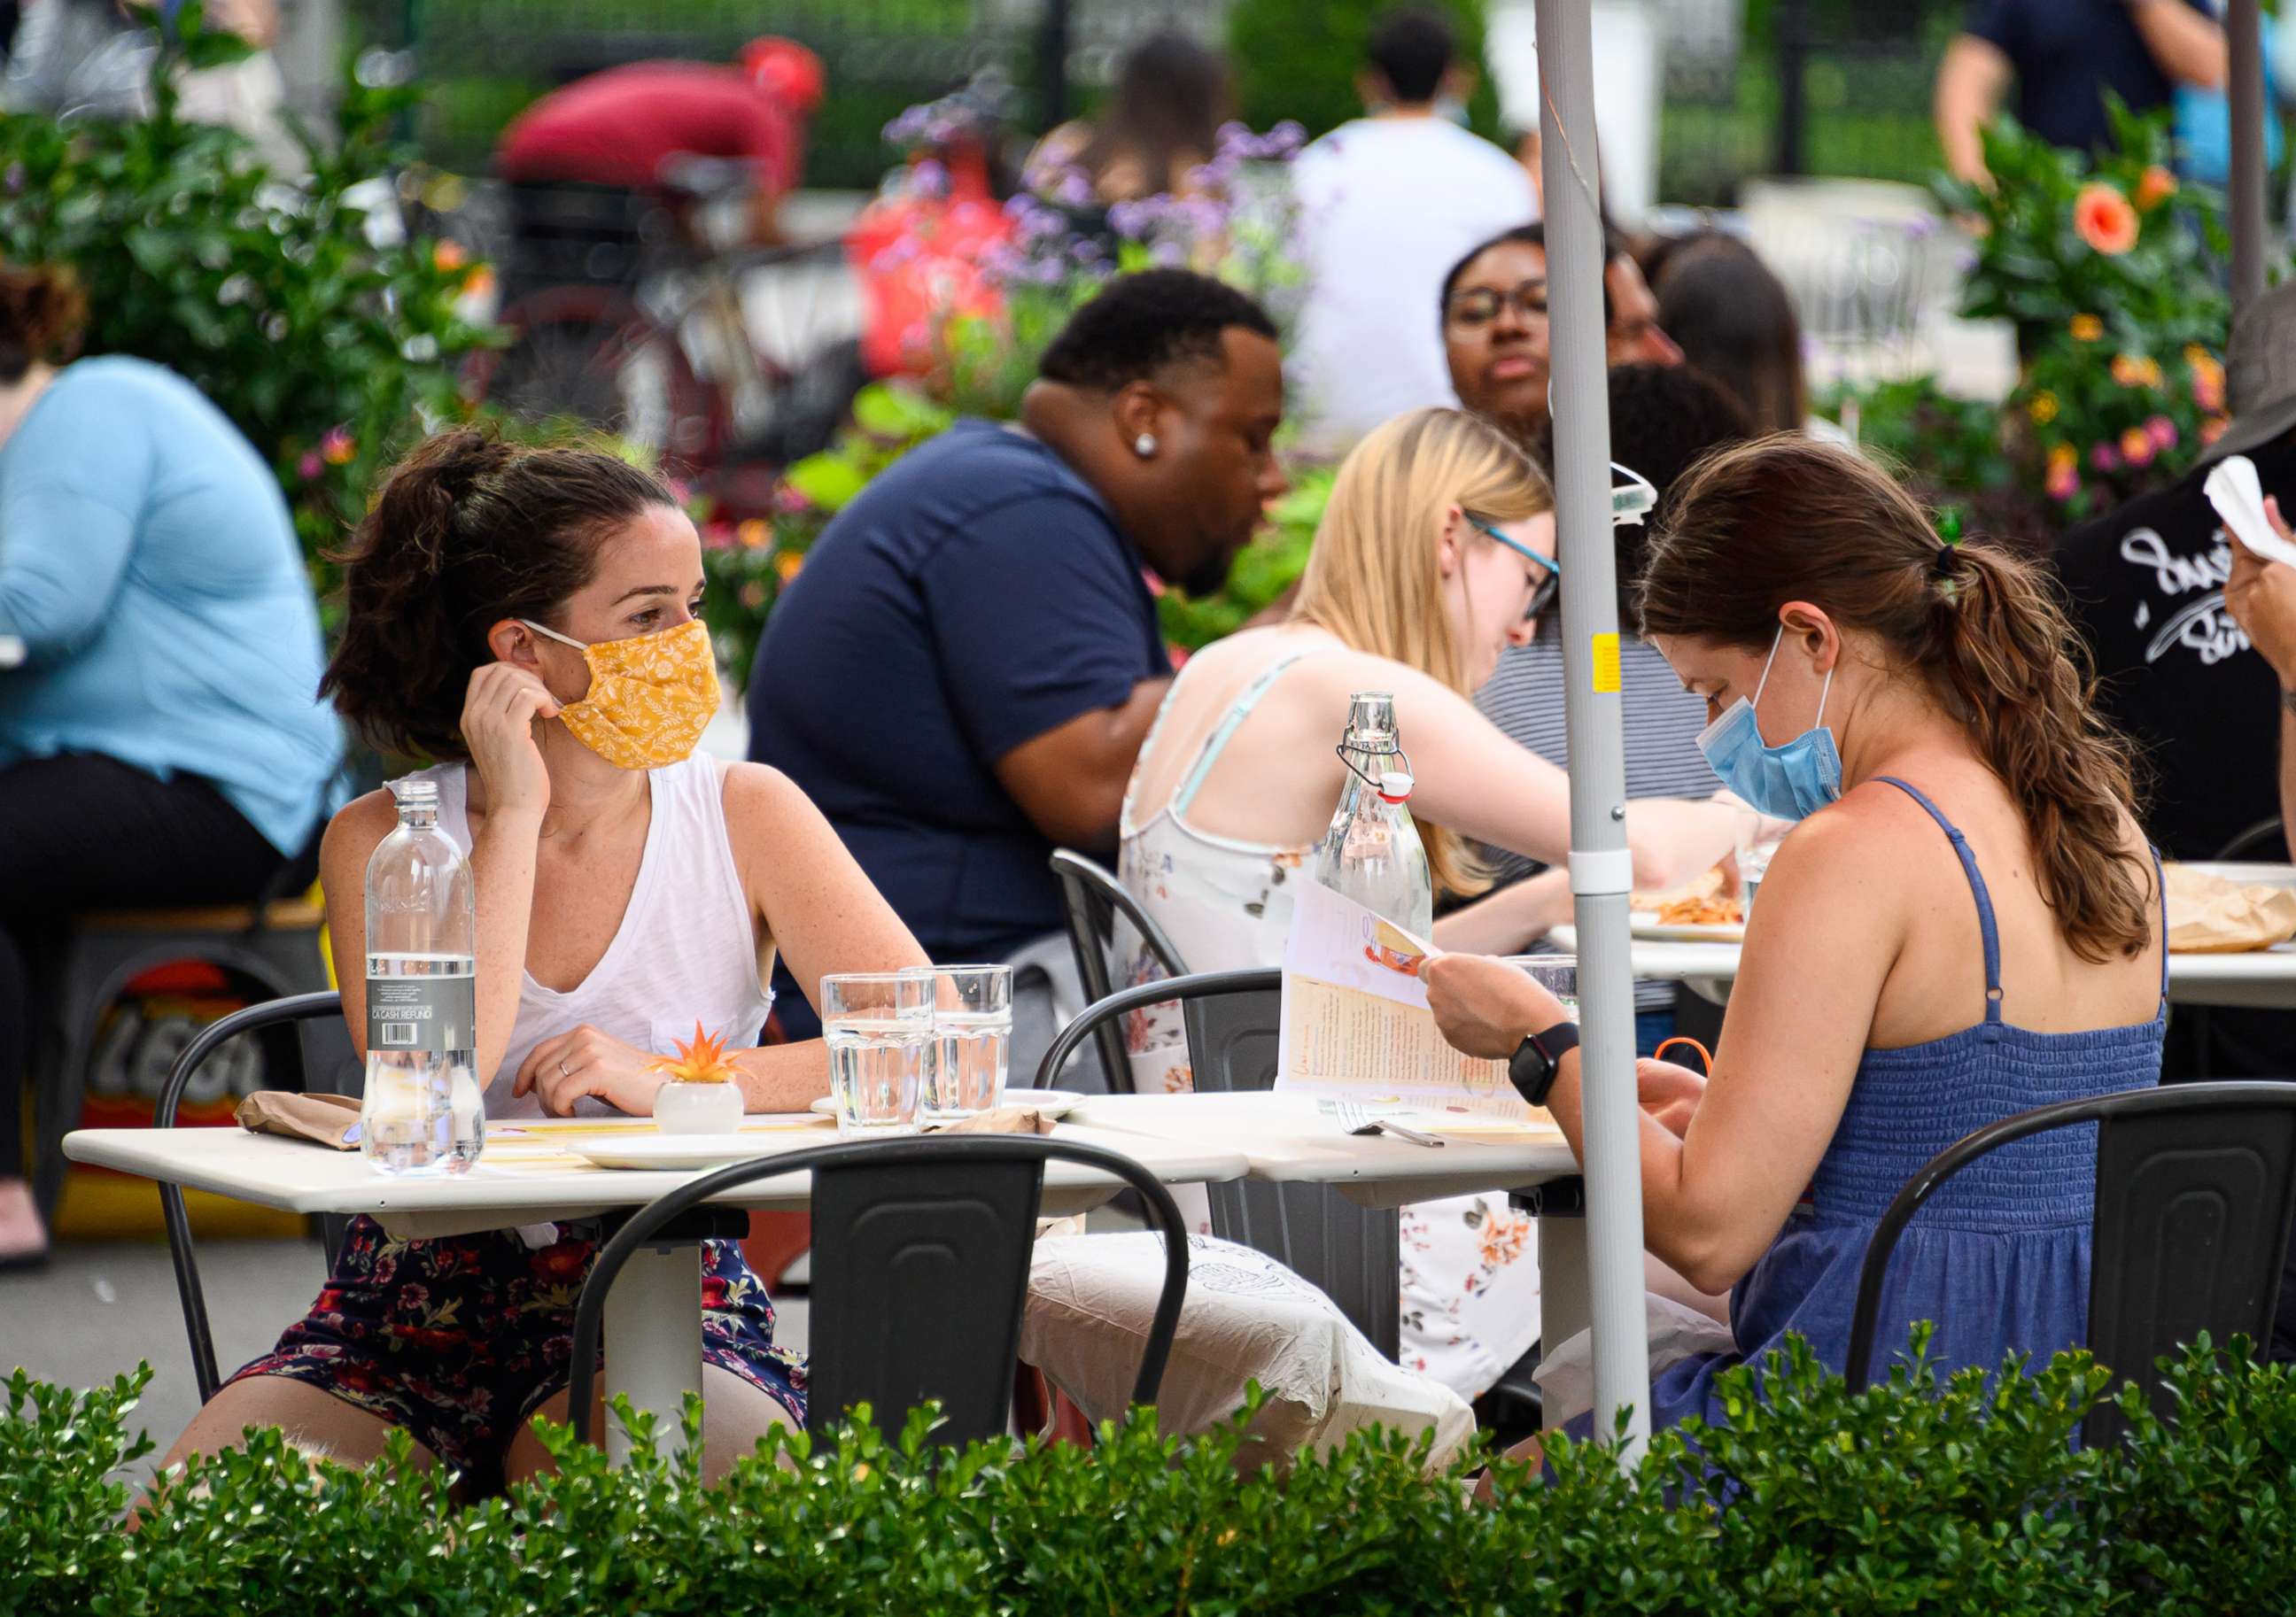 PHOTO: People wear protective face masks at an outdoor restaurant in the Flatiron District of New York, July 26, 2020.